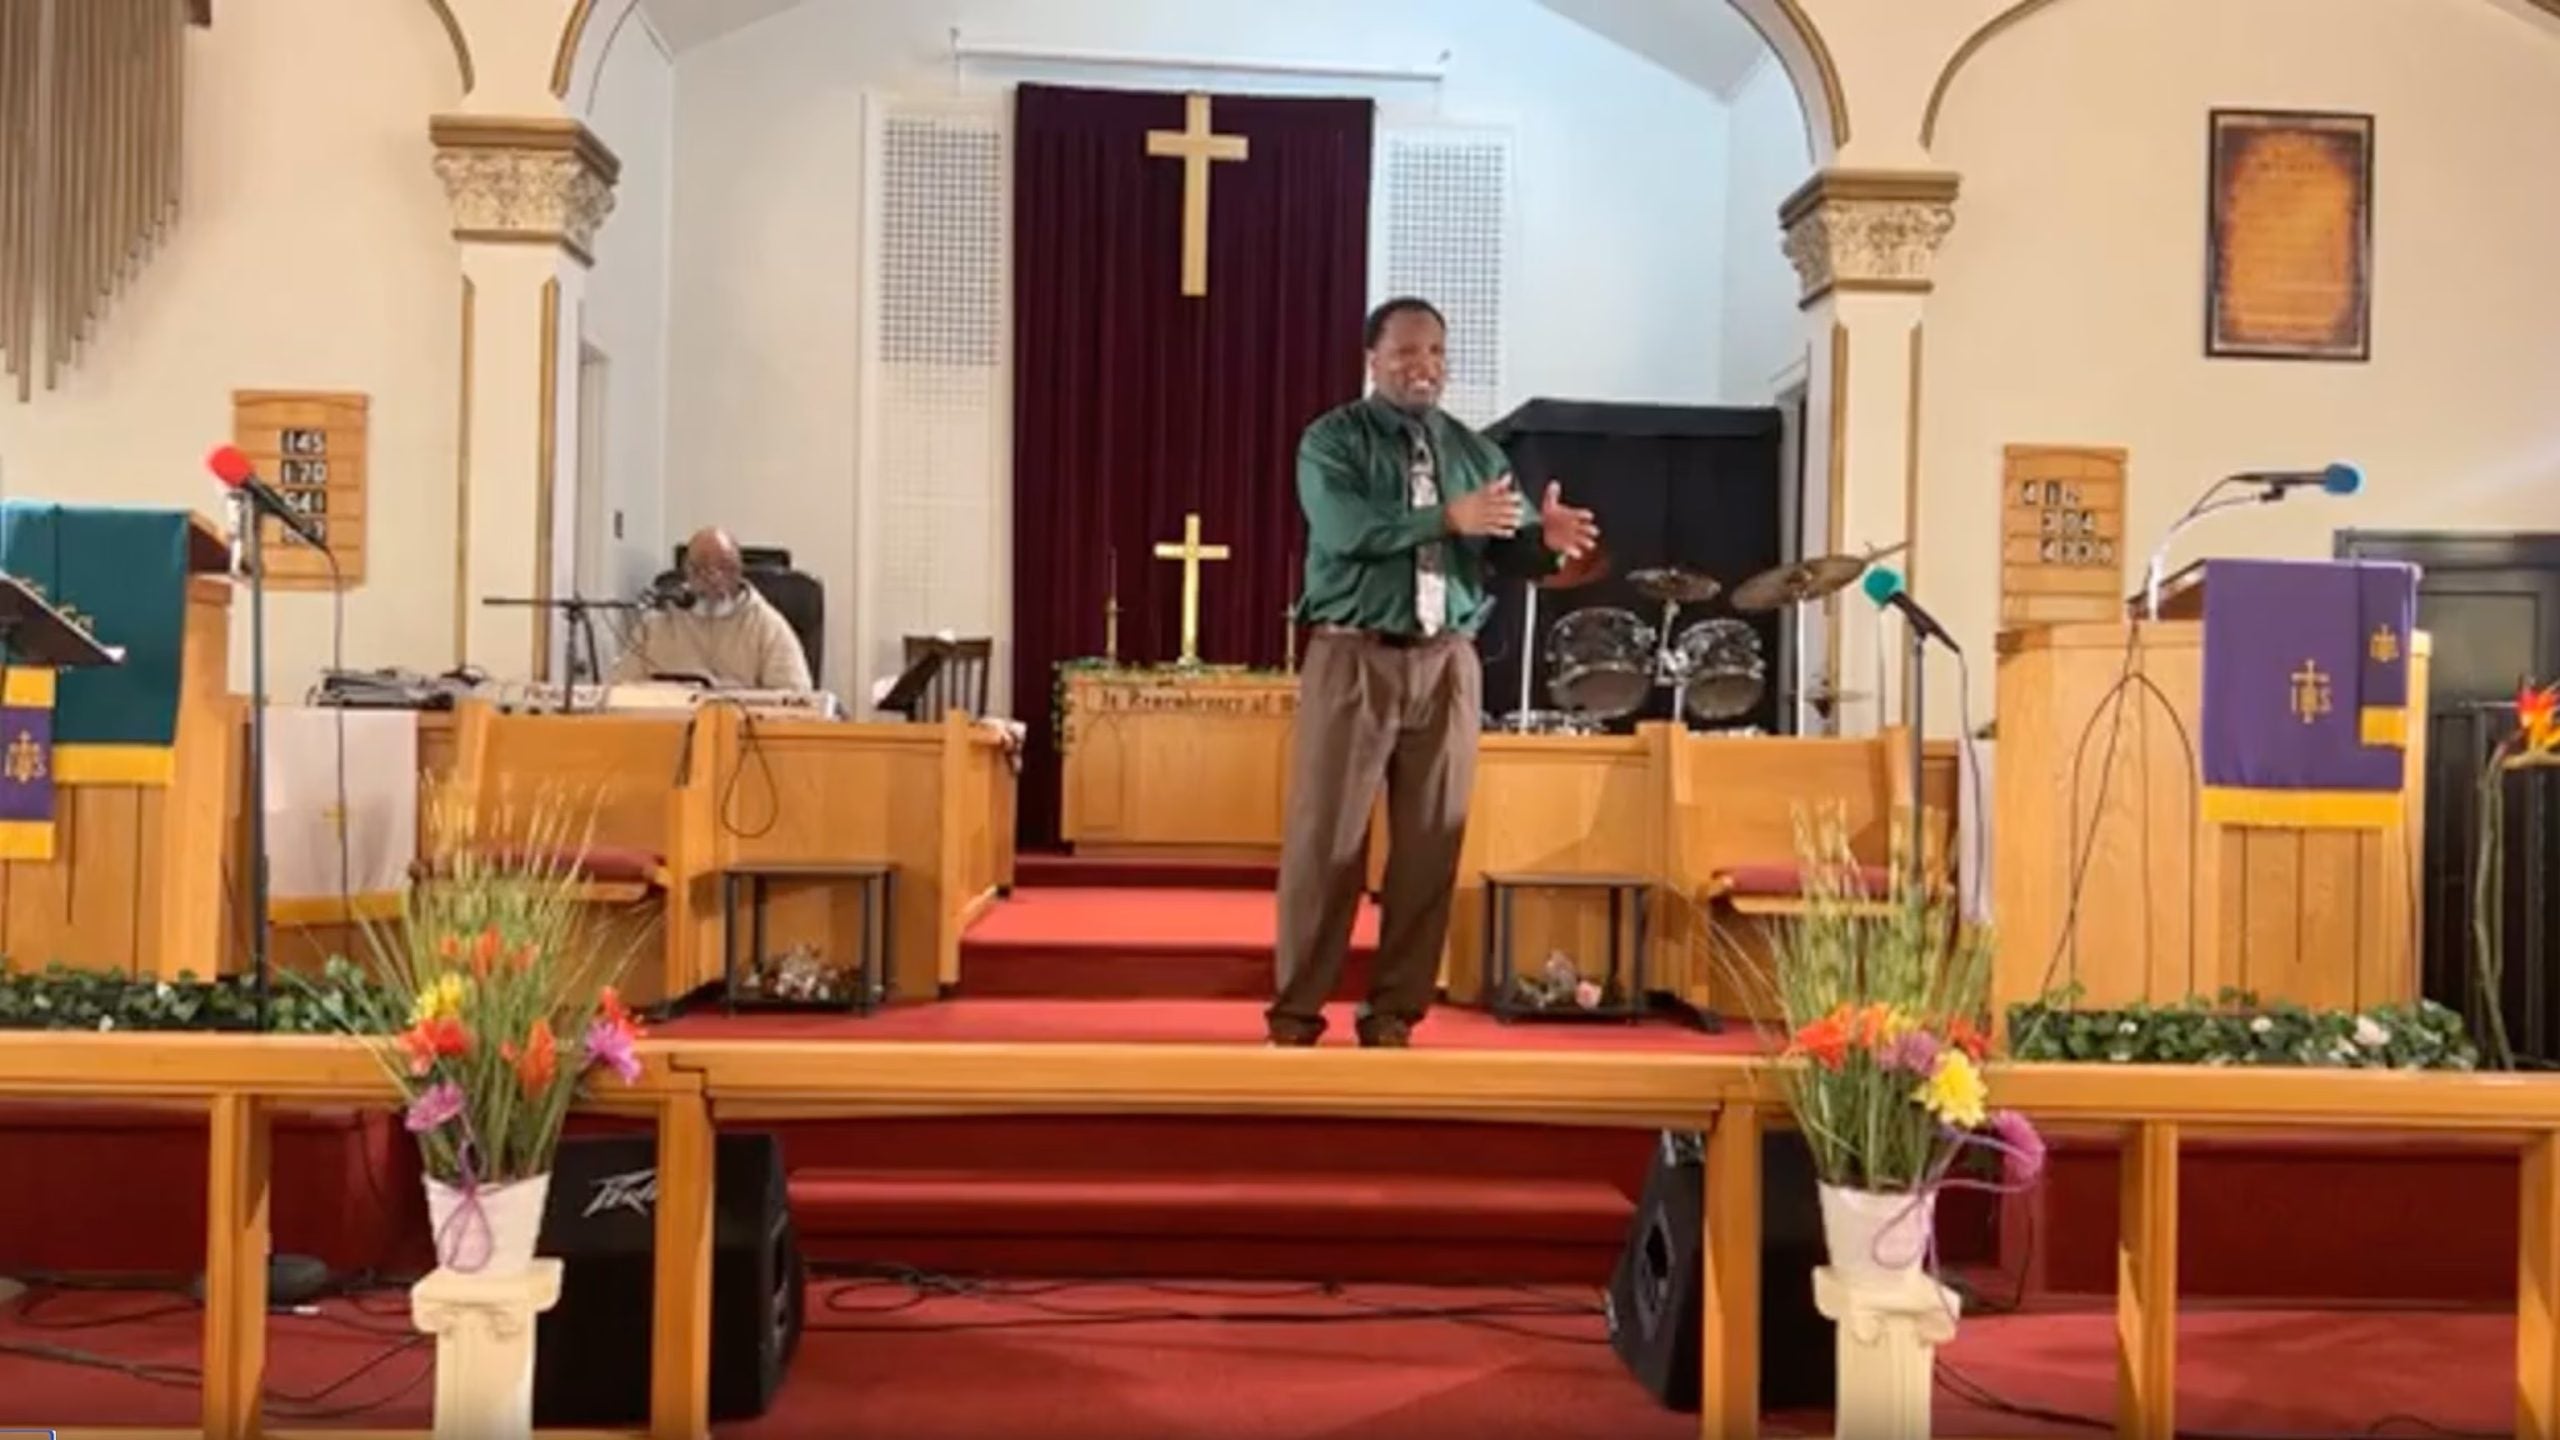 Suspect Arrested After Attempt To Shoot Pennsylvania Pastor During Sunday Sermon